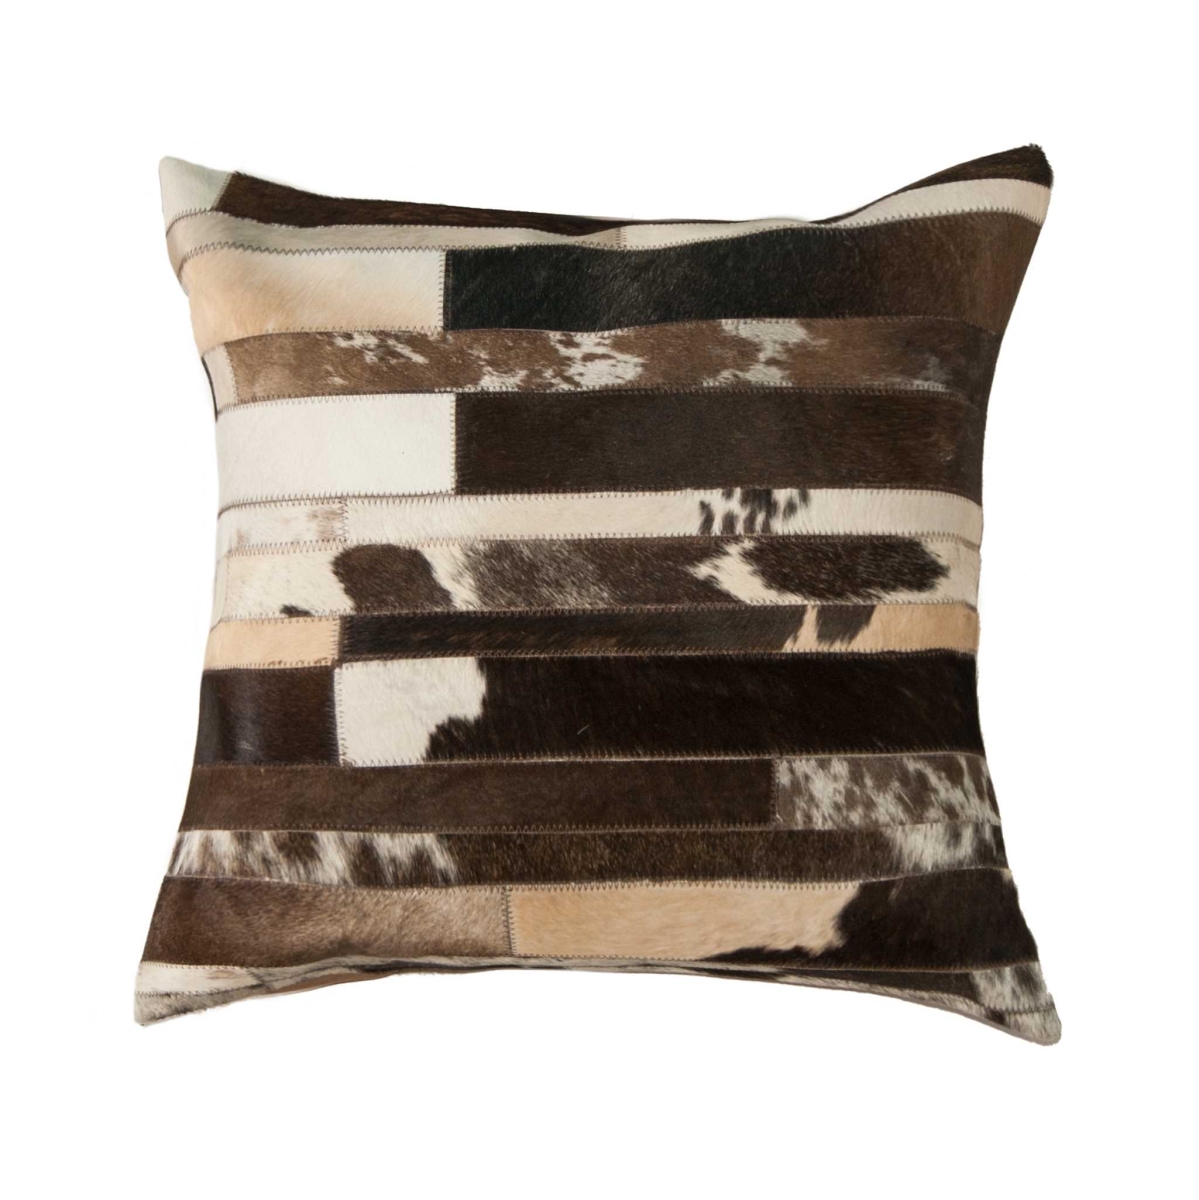 Home Roots Beddings 332306 Torino Classic Large Madrid Cowhide Pillow, Chocolate & White - 22 X 22 In.